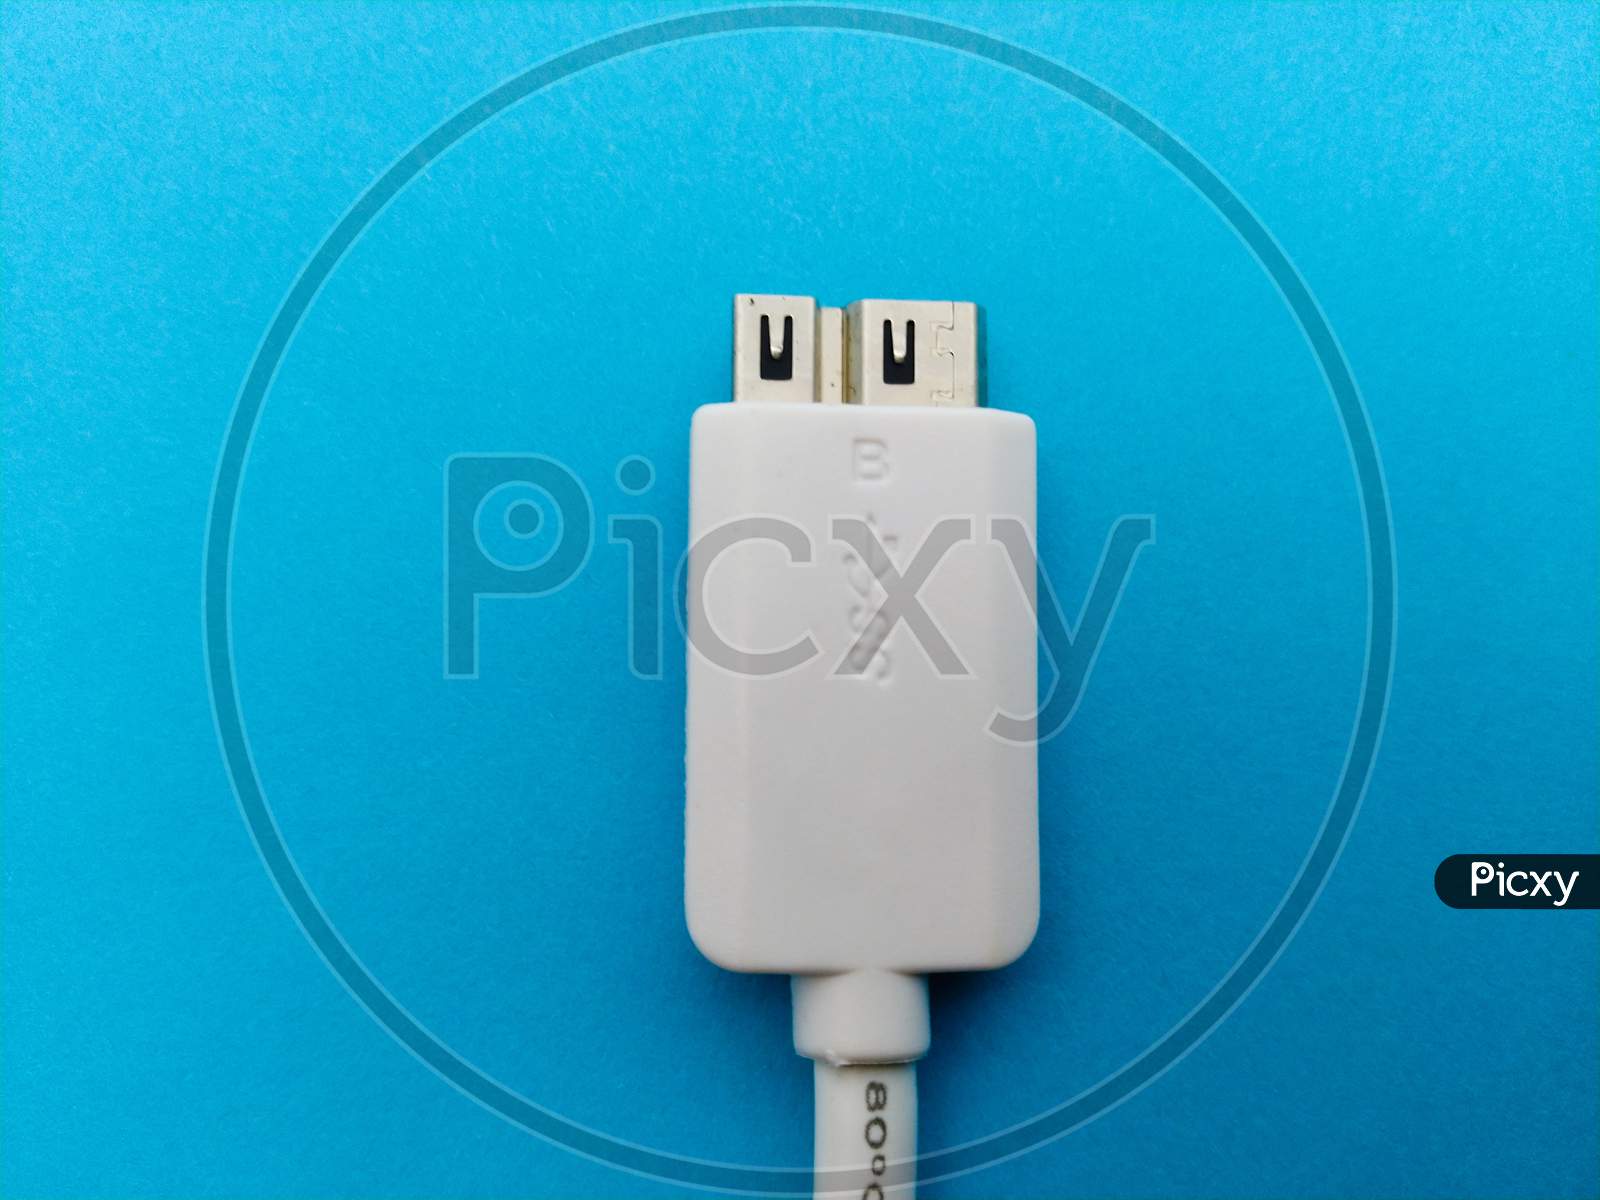 USB Port, High Speed USB Cable For Data Transfer, with blue background.